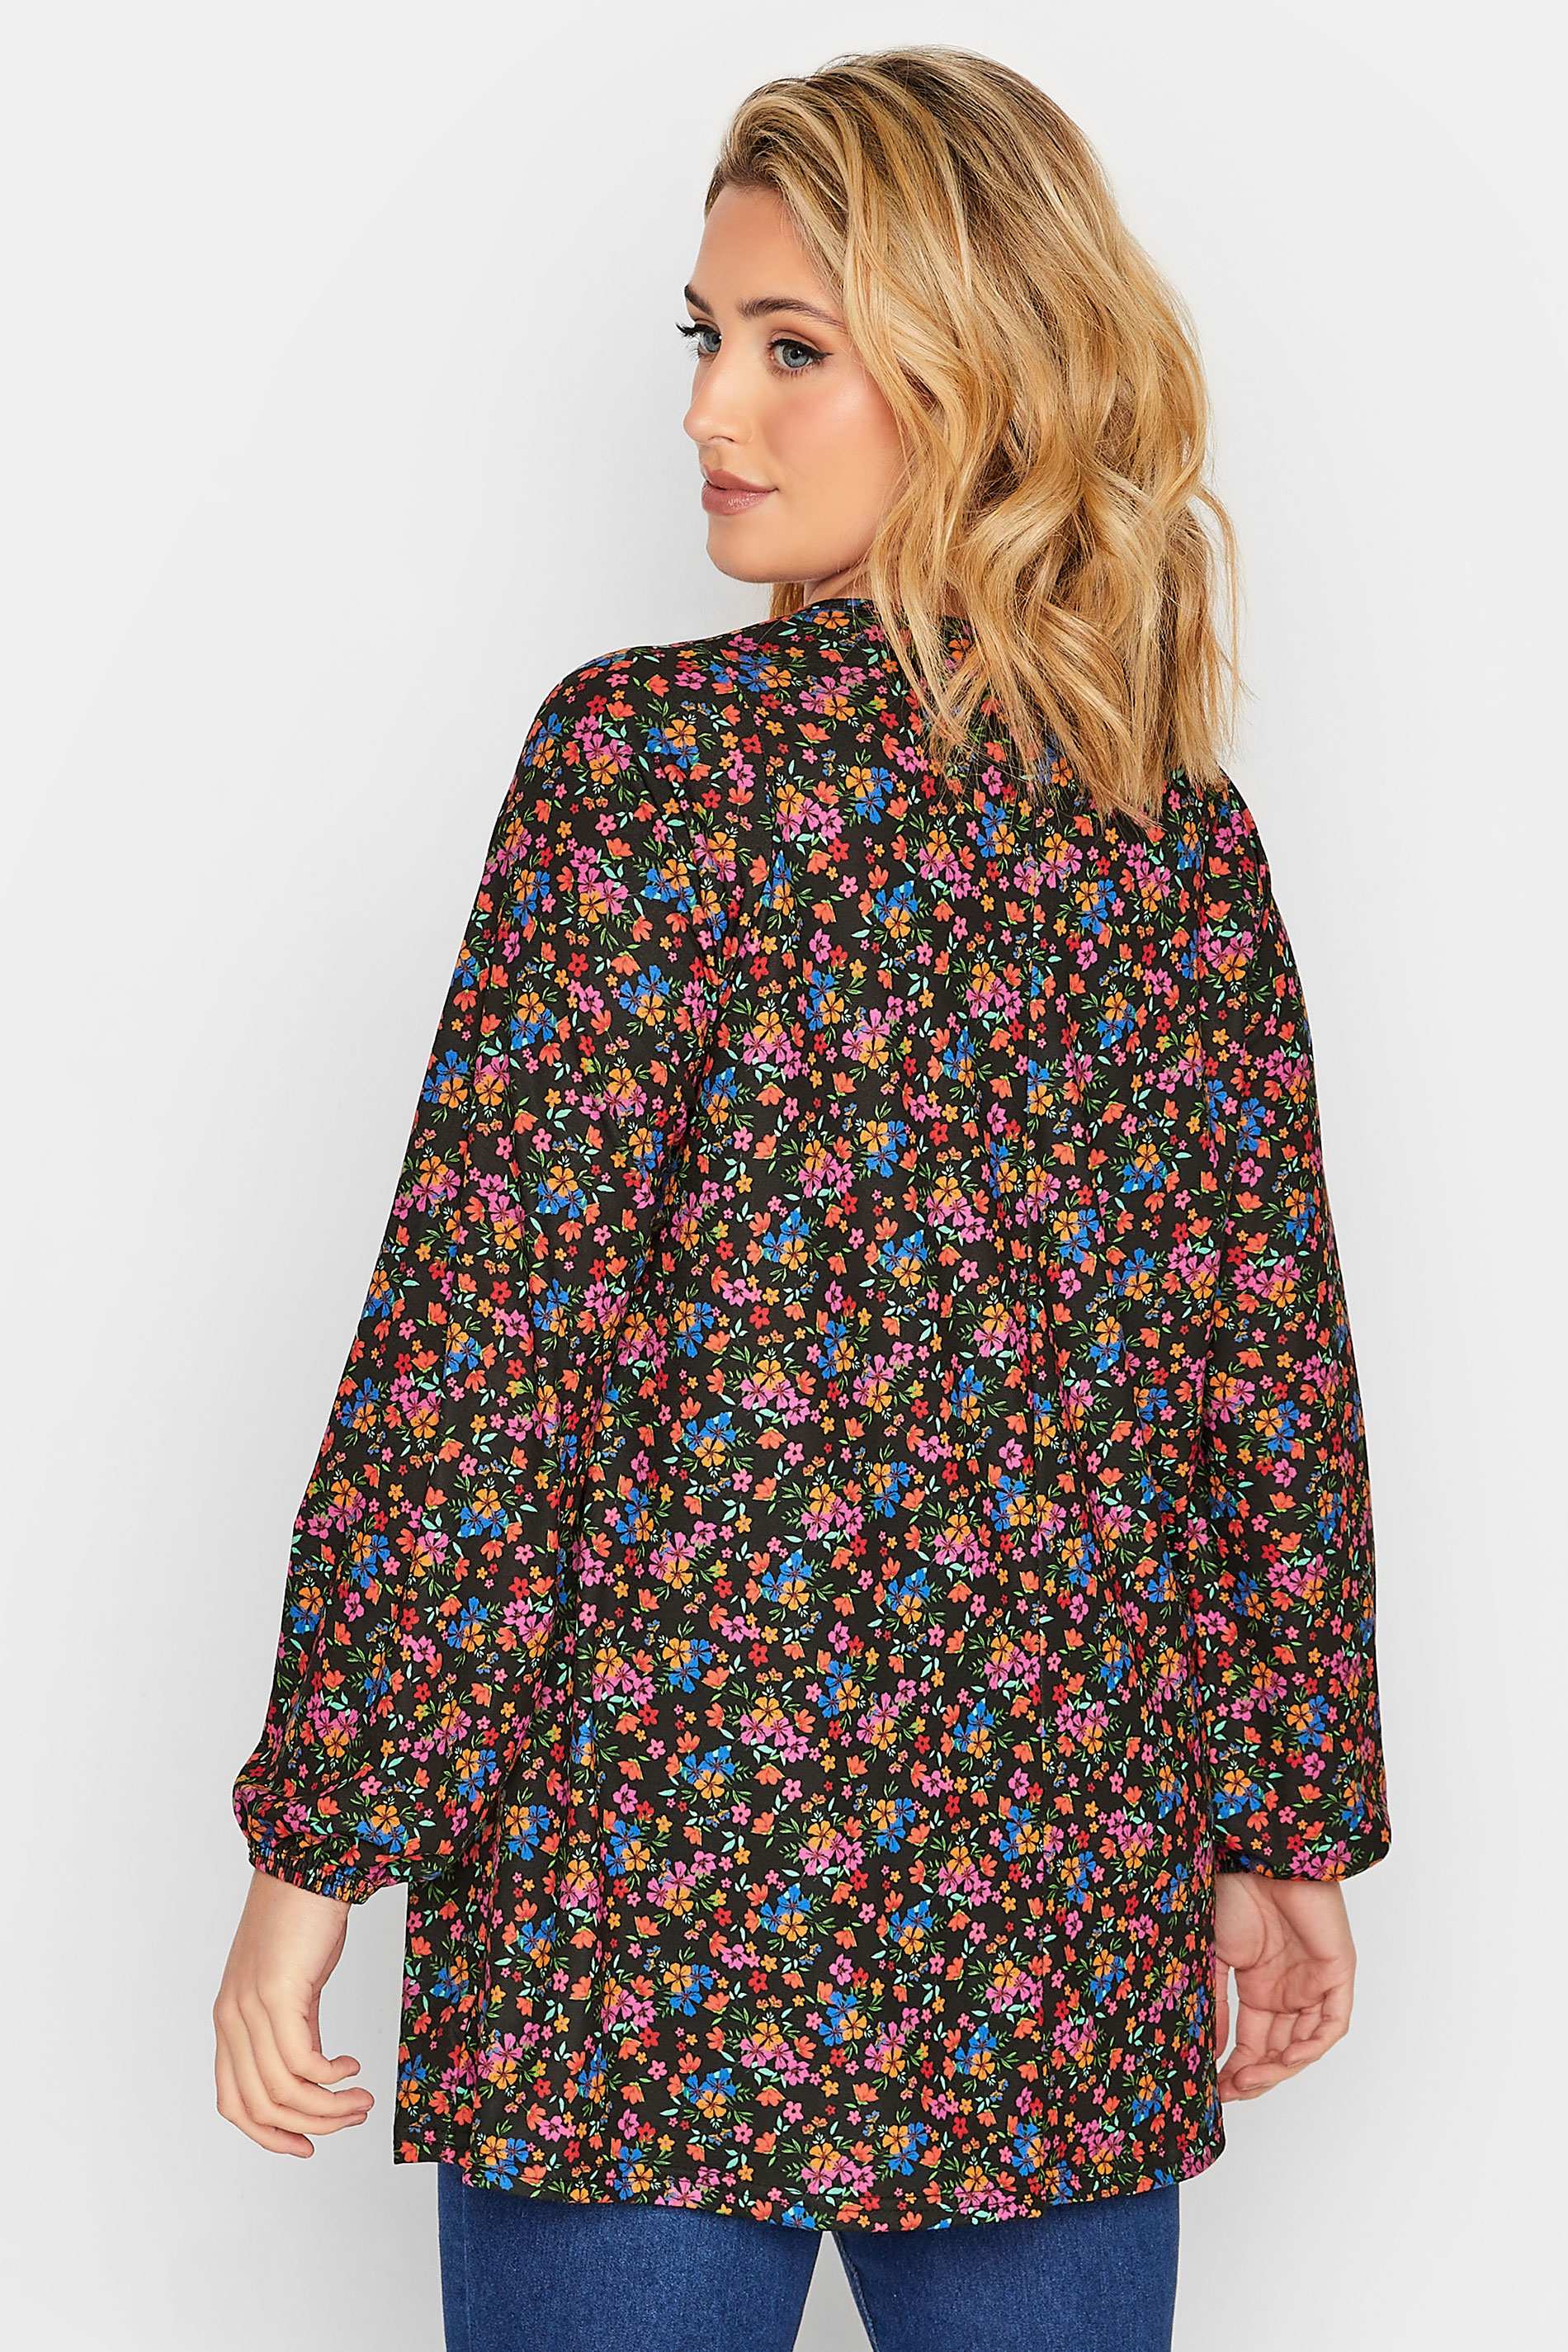 LIMITED COLLECTION Plus Size Black Floral Bust Detail Top | Yours Clothing 3